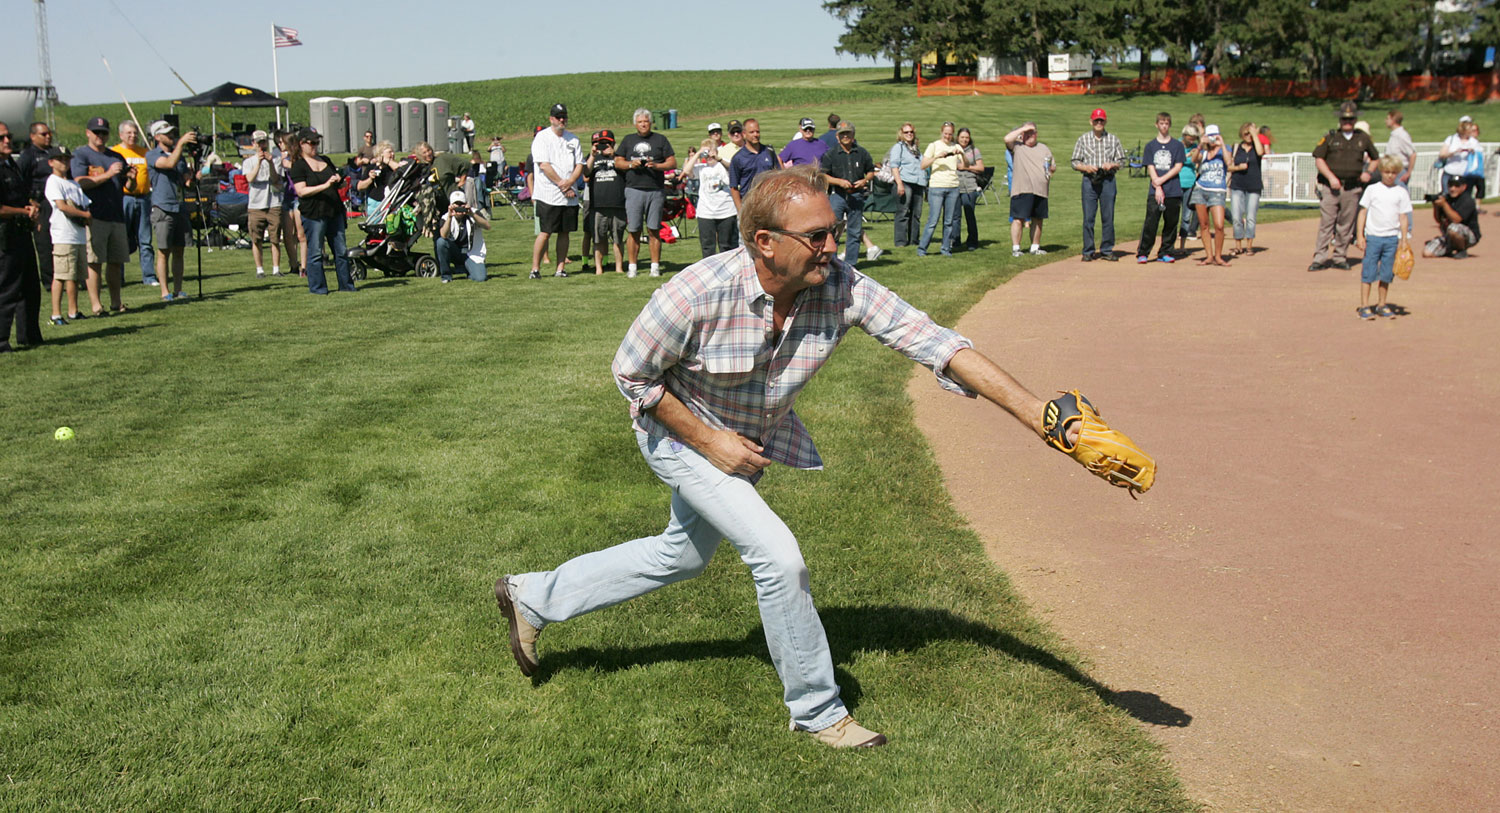 Actor Kevin Costner plays catch with his sons during a party celebrating the 25th anniversary of the "Field of Dreams" movie Friday, June 13, 2014, near Dyersville, Iowa. (Dennis Magee&mdash;Waterloo Courier/AP)